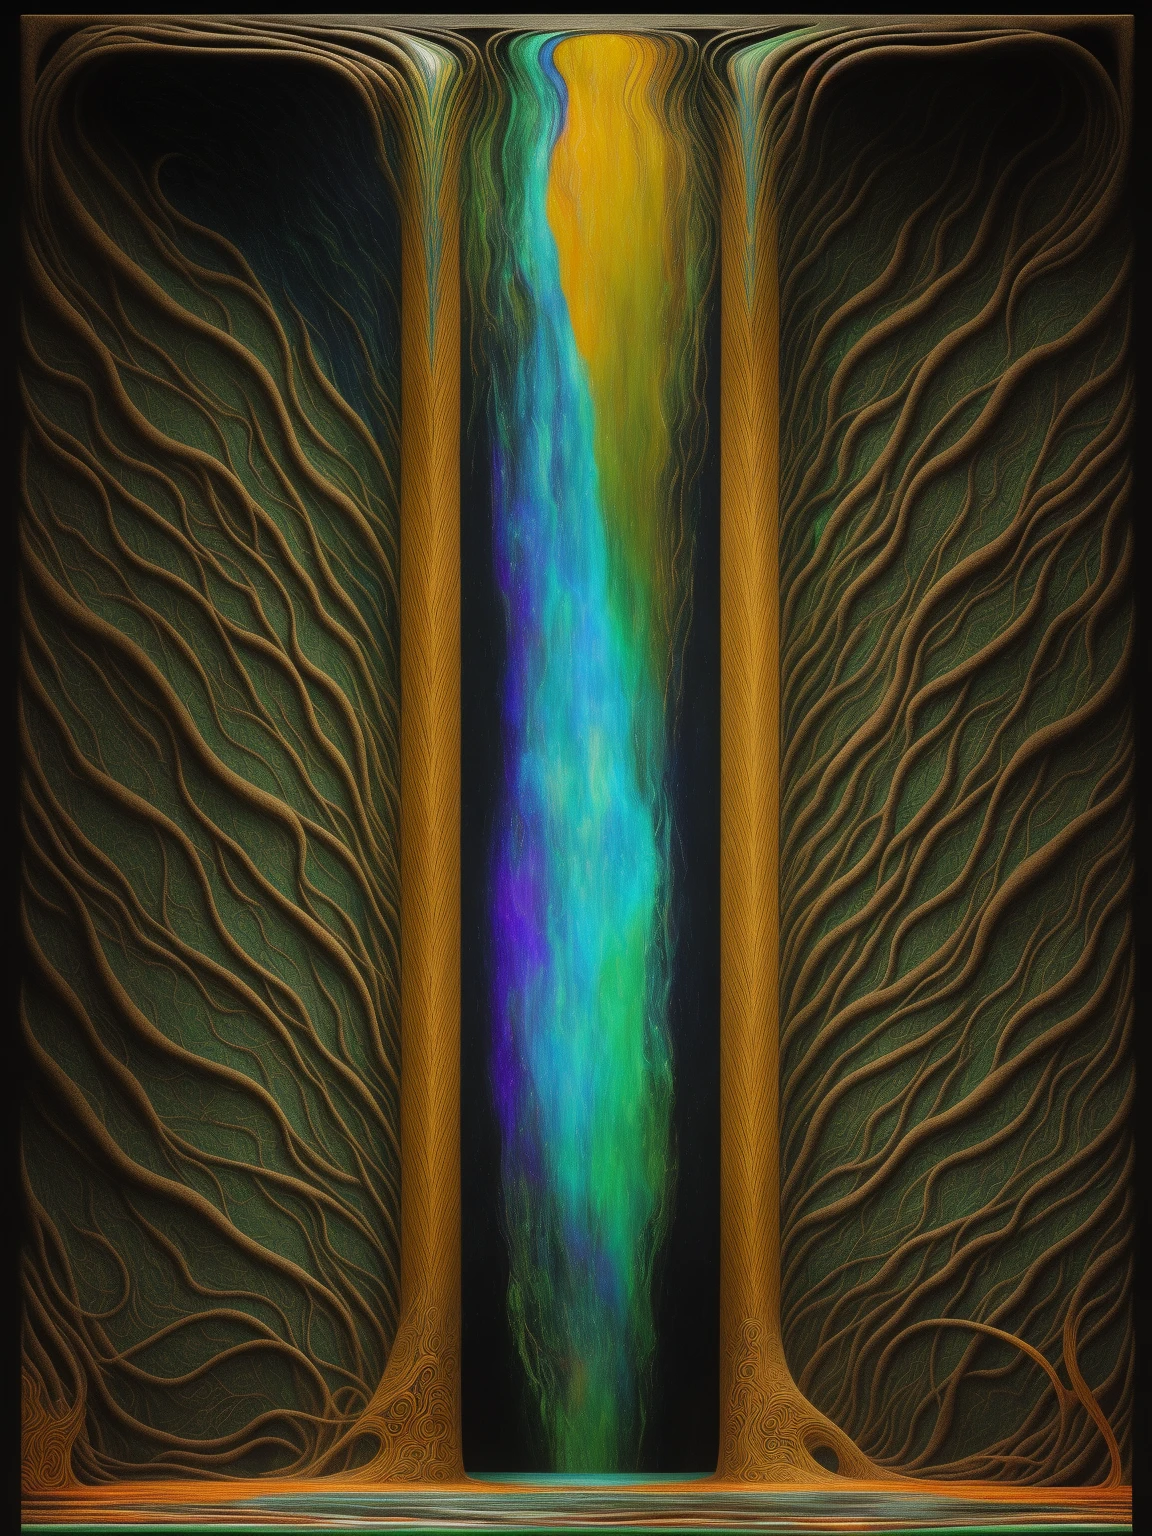 waterfall upwards, levitating water, like an ever flowing stream, water falling into the sky, waves, William Blake, visionary art, New Age art, computer art, (Eyvinde Earle), JRR Tolkien, ((Tyler Hobbs)), aboriginal artwork, Hilma af Klint, dreamtime, falling up, organic abstract geometric artwork, burn marks, (HR Giger), Sol Lewitt, intricate, tryptophobia, art nouveau, expired film, death metal album cover, altars of madness, (abstract ukiyo-e), contrast, shadows, houdini, ambient occlusion, subsurface scattering, depth of field, redshift, octane, 8K, high resolution render, forest green, yellow, orange, indigo, amber, intricate, hyper-realistic, endless voids, elden ring style, modern disney style, nousr robot, pinhole camera, illuminati, ancient glyphs, incredibly complex!, nikon, DLSR, NERF